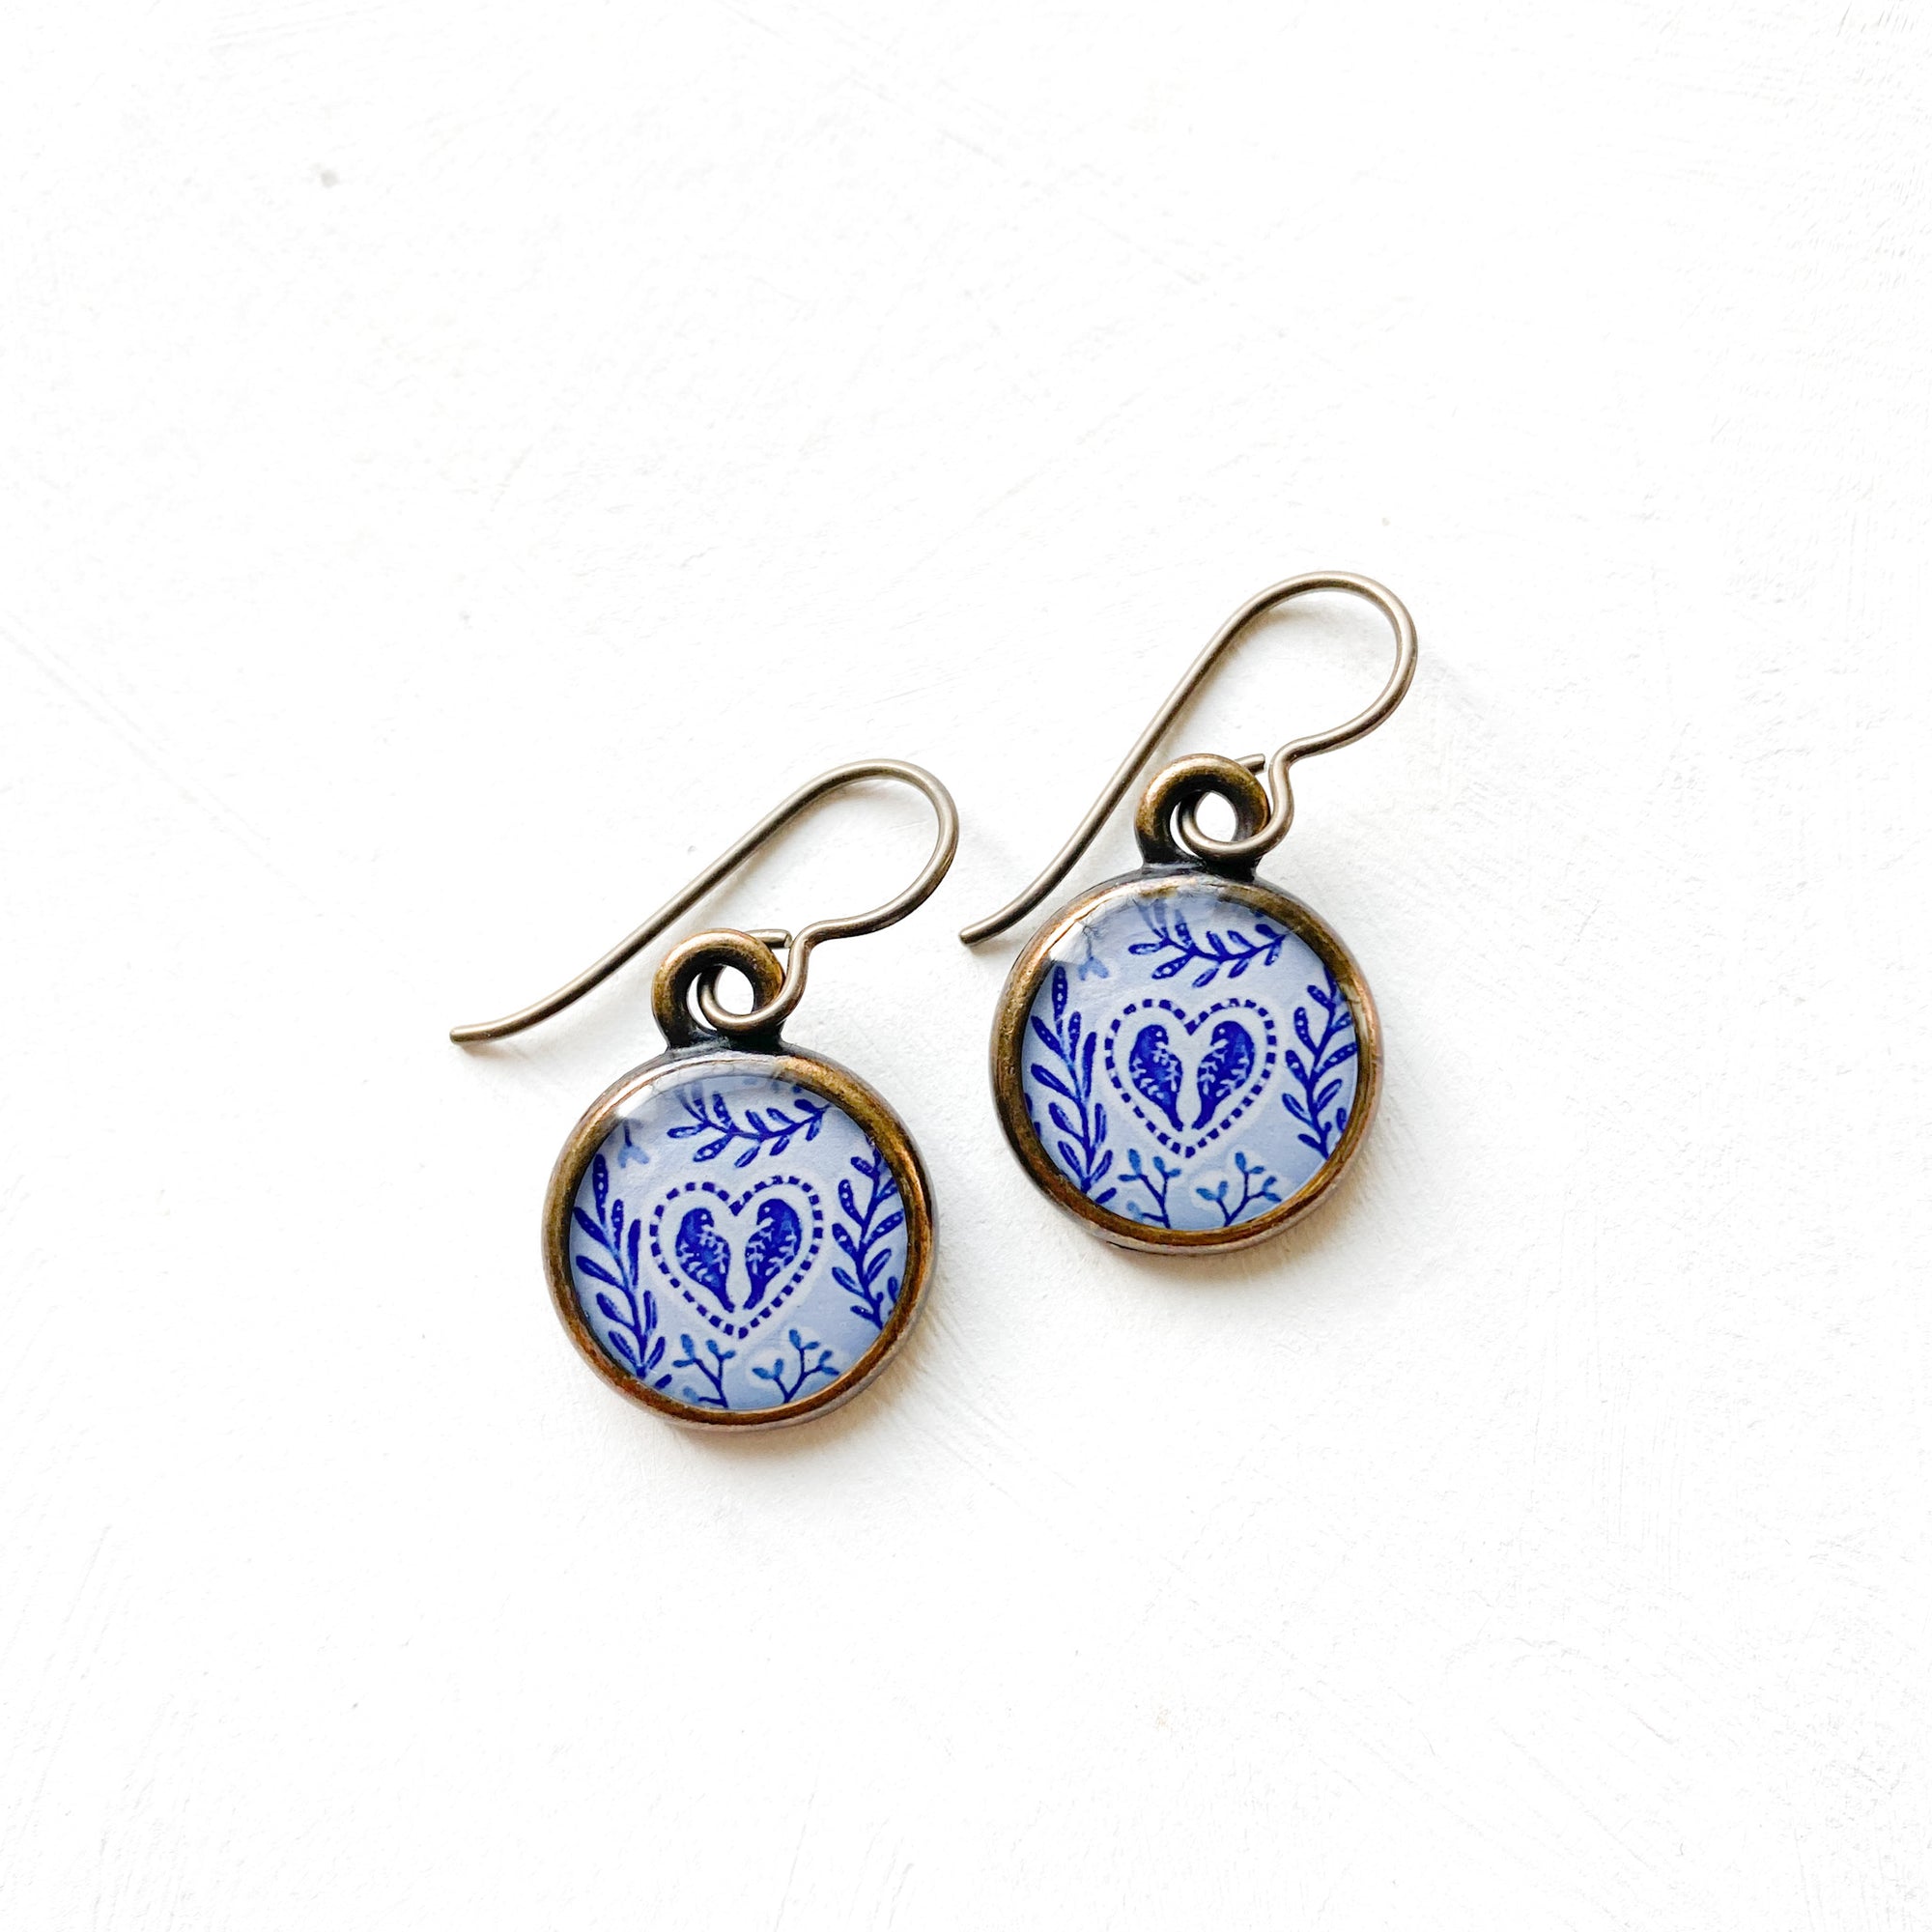 a pair of earrings with blue and white designs